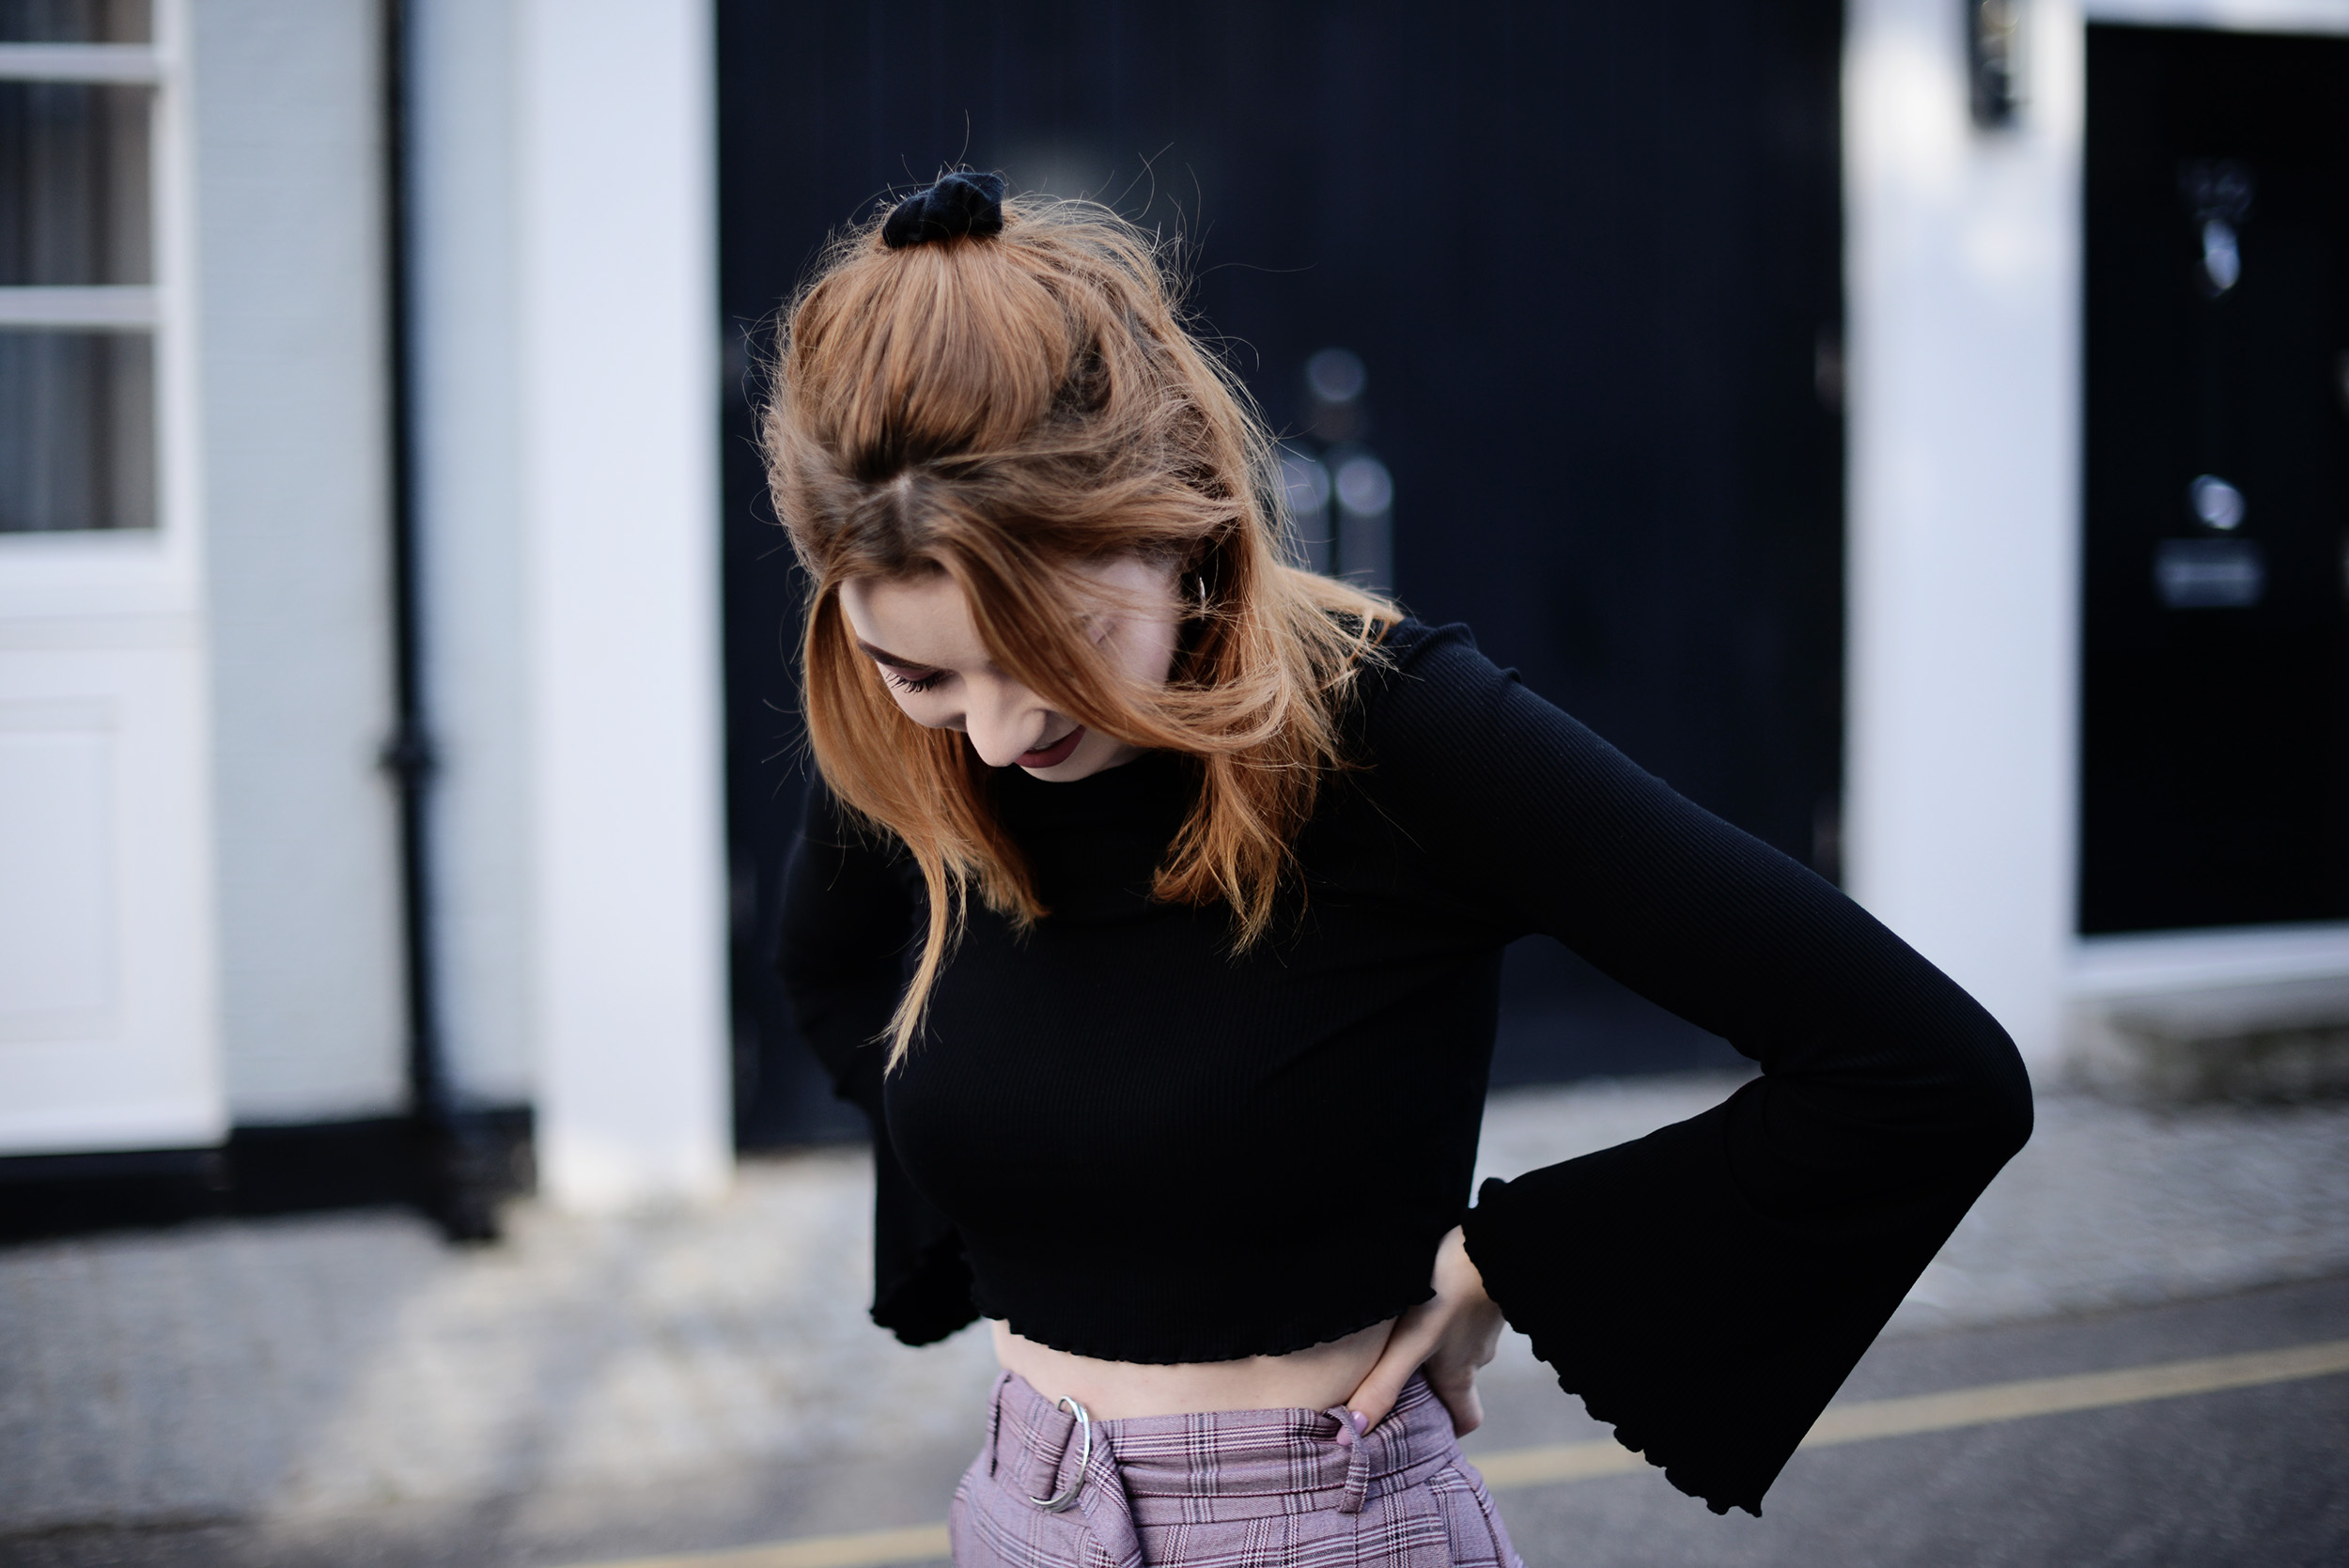 pink-check-wide-leg-trousers